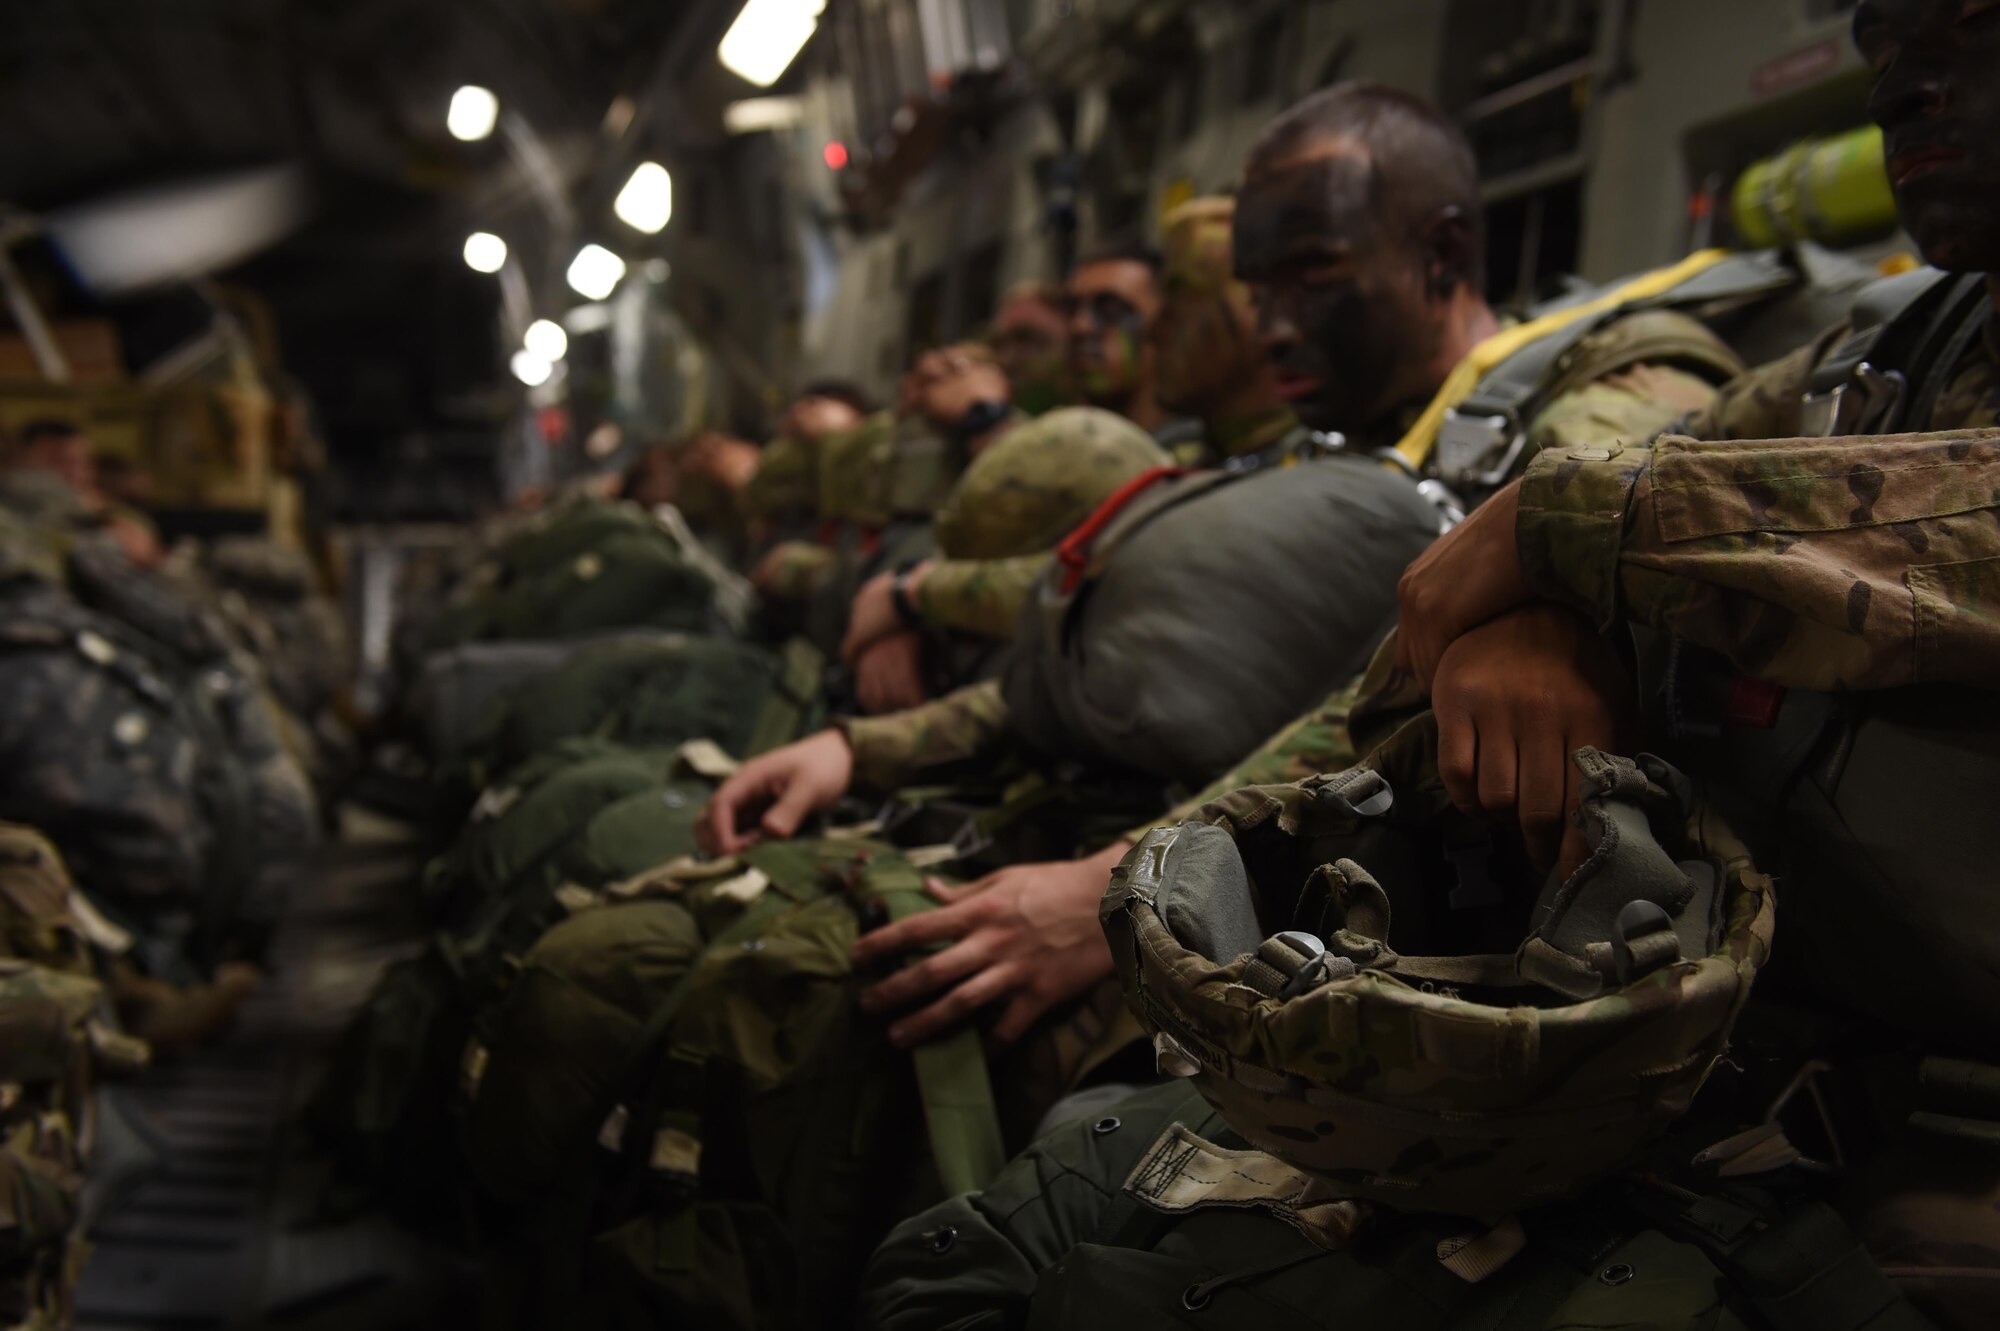 82nd Airborne Division Paratroopers prepare to jump from a 62nd Airlift Wing C-17 Globemaster III into Poland on June 6, 2016 during Exercise Swift Response 2016.  The Paratroopers endured a more than nine hour flight to the drop zone where one by one they static line jumped from the C-17. (Air Force photo/Staff Sgt. Naomi Shipley)